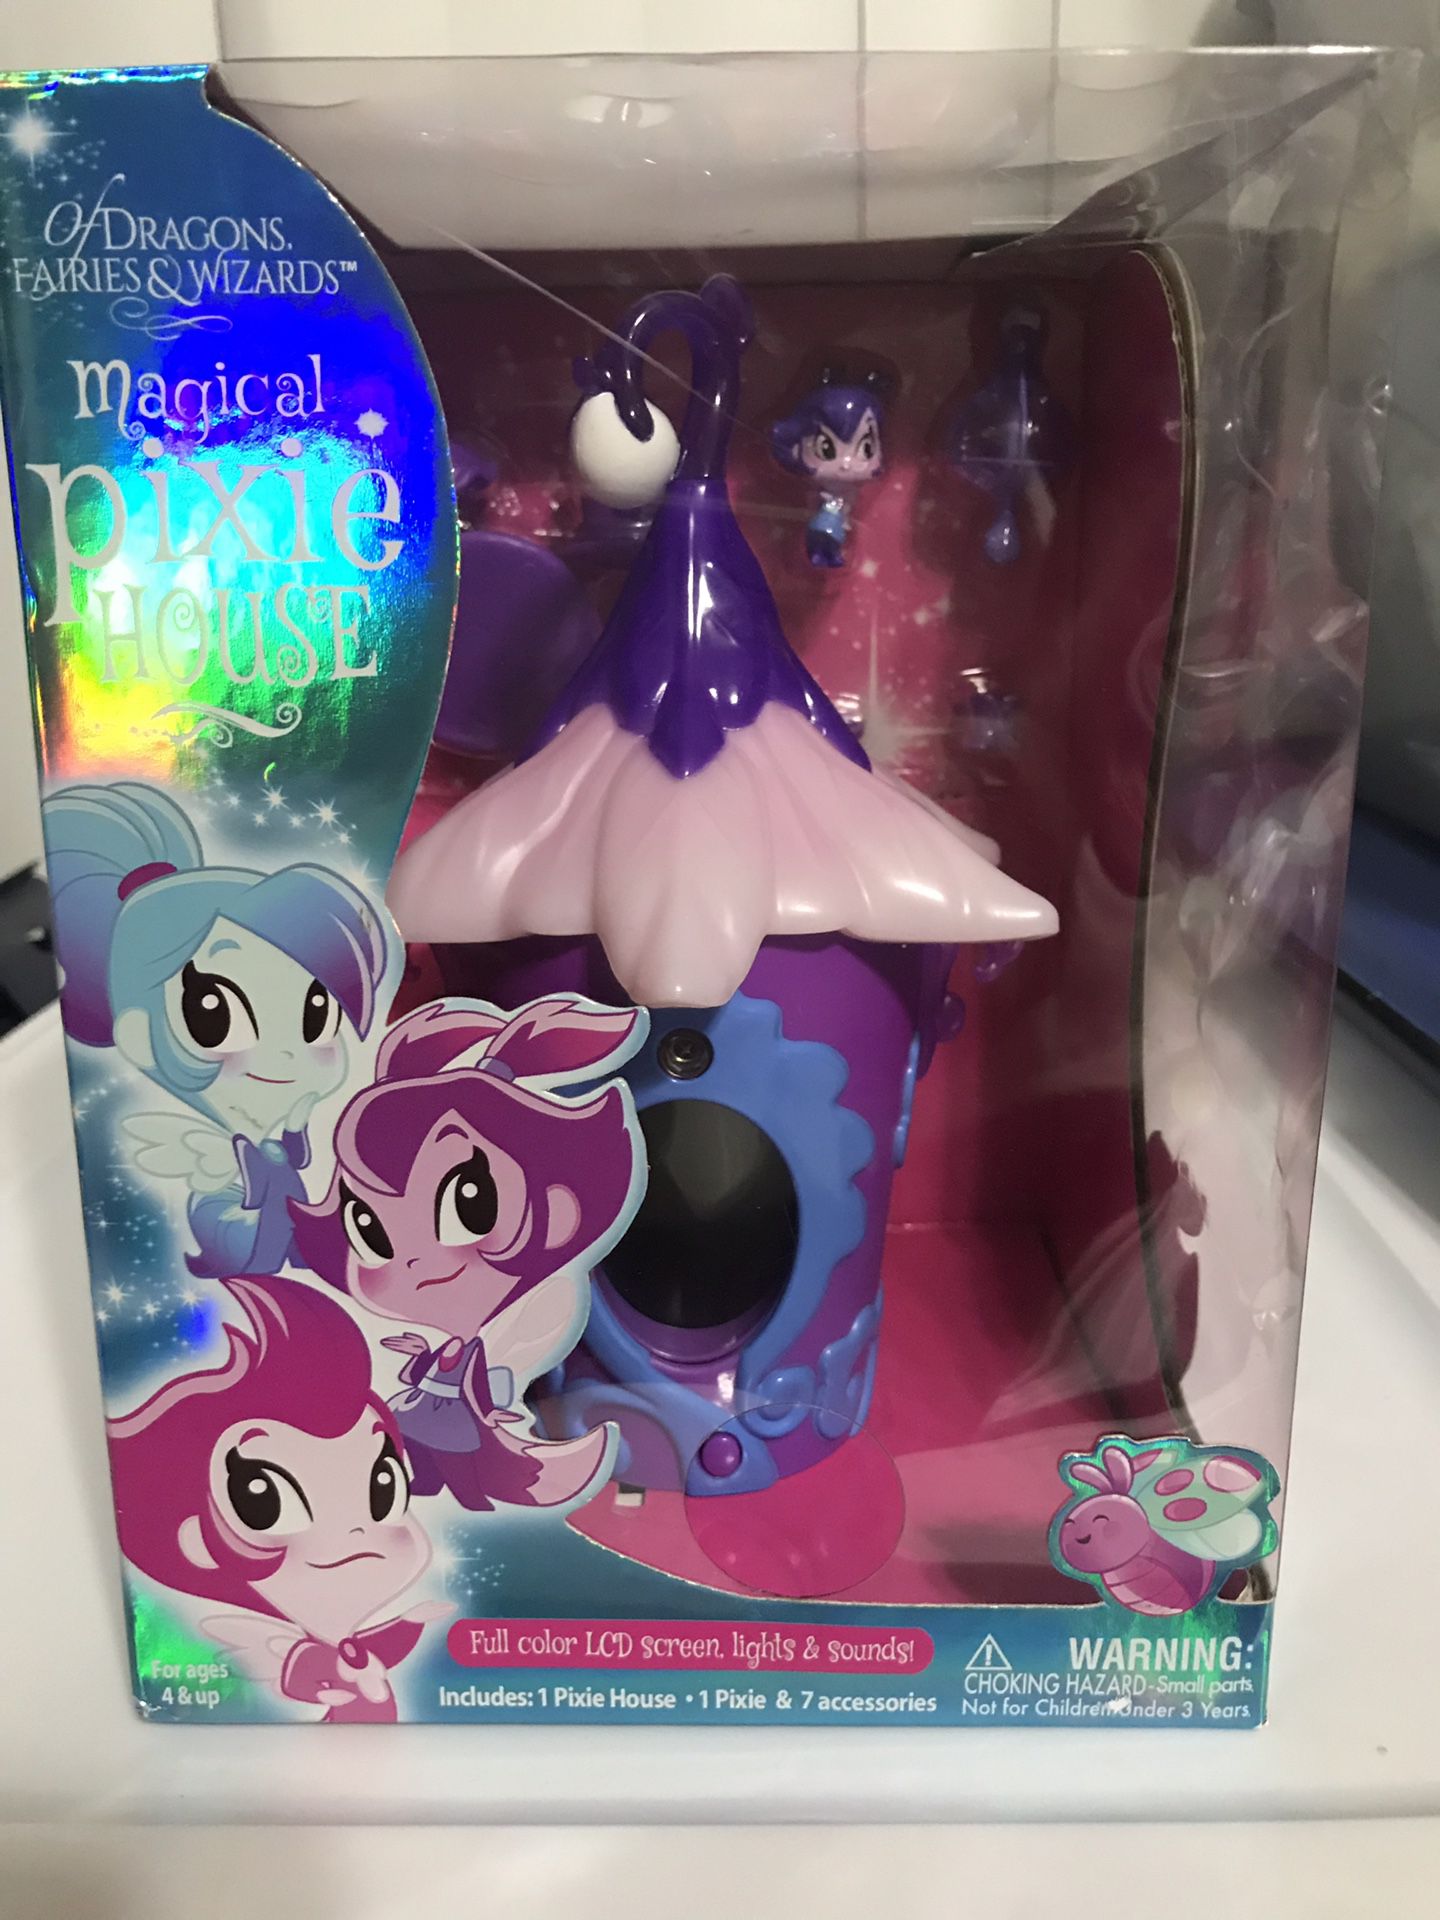 Of Dragons Fairies & Wizards Magical Purple Pixie House New in Package NWT 